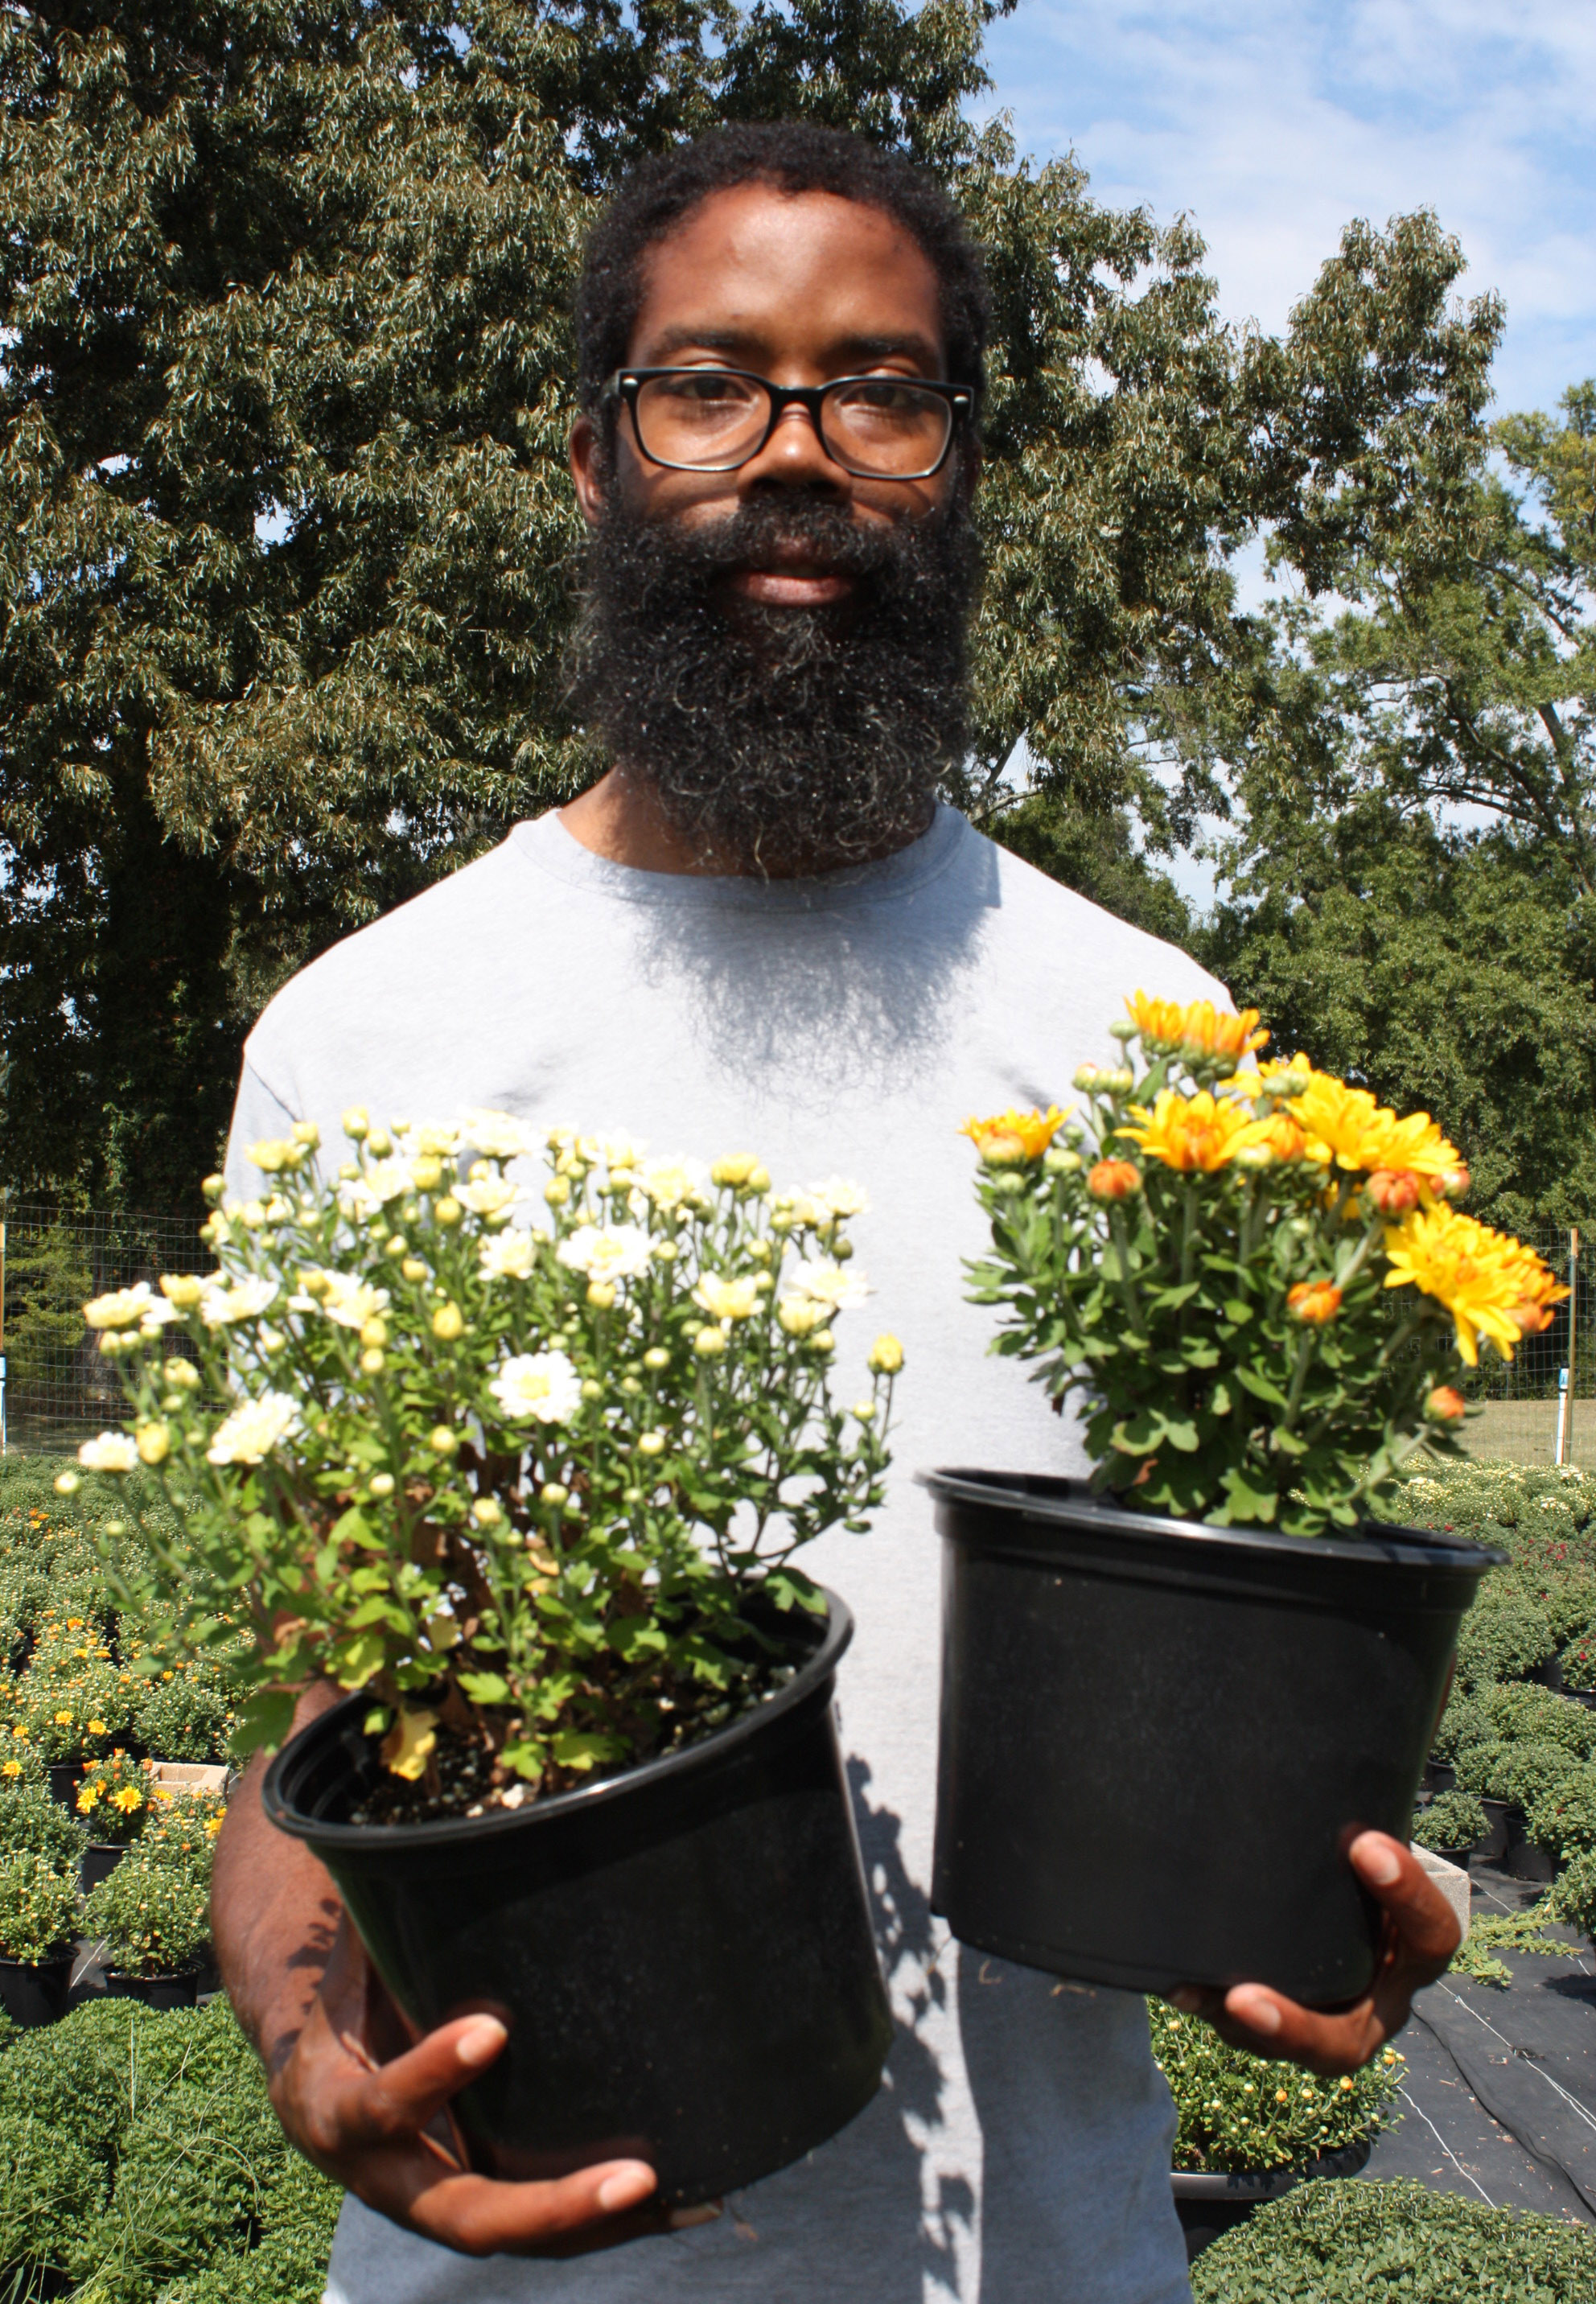 Horticulture student Spencer Daniel displays two colors of mums that will be for sale at GNTC’s Fall Mum Sale, Sept. 18-21.